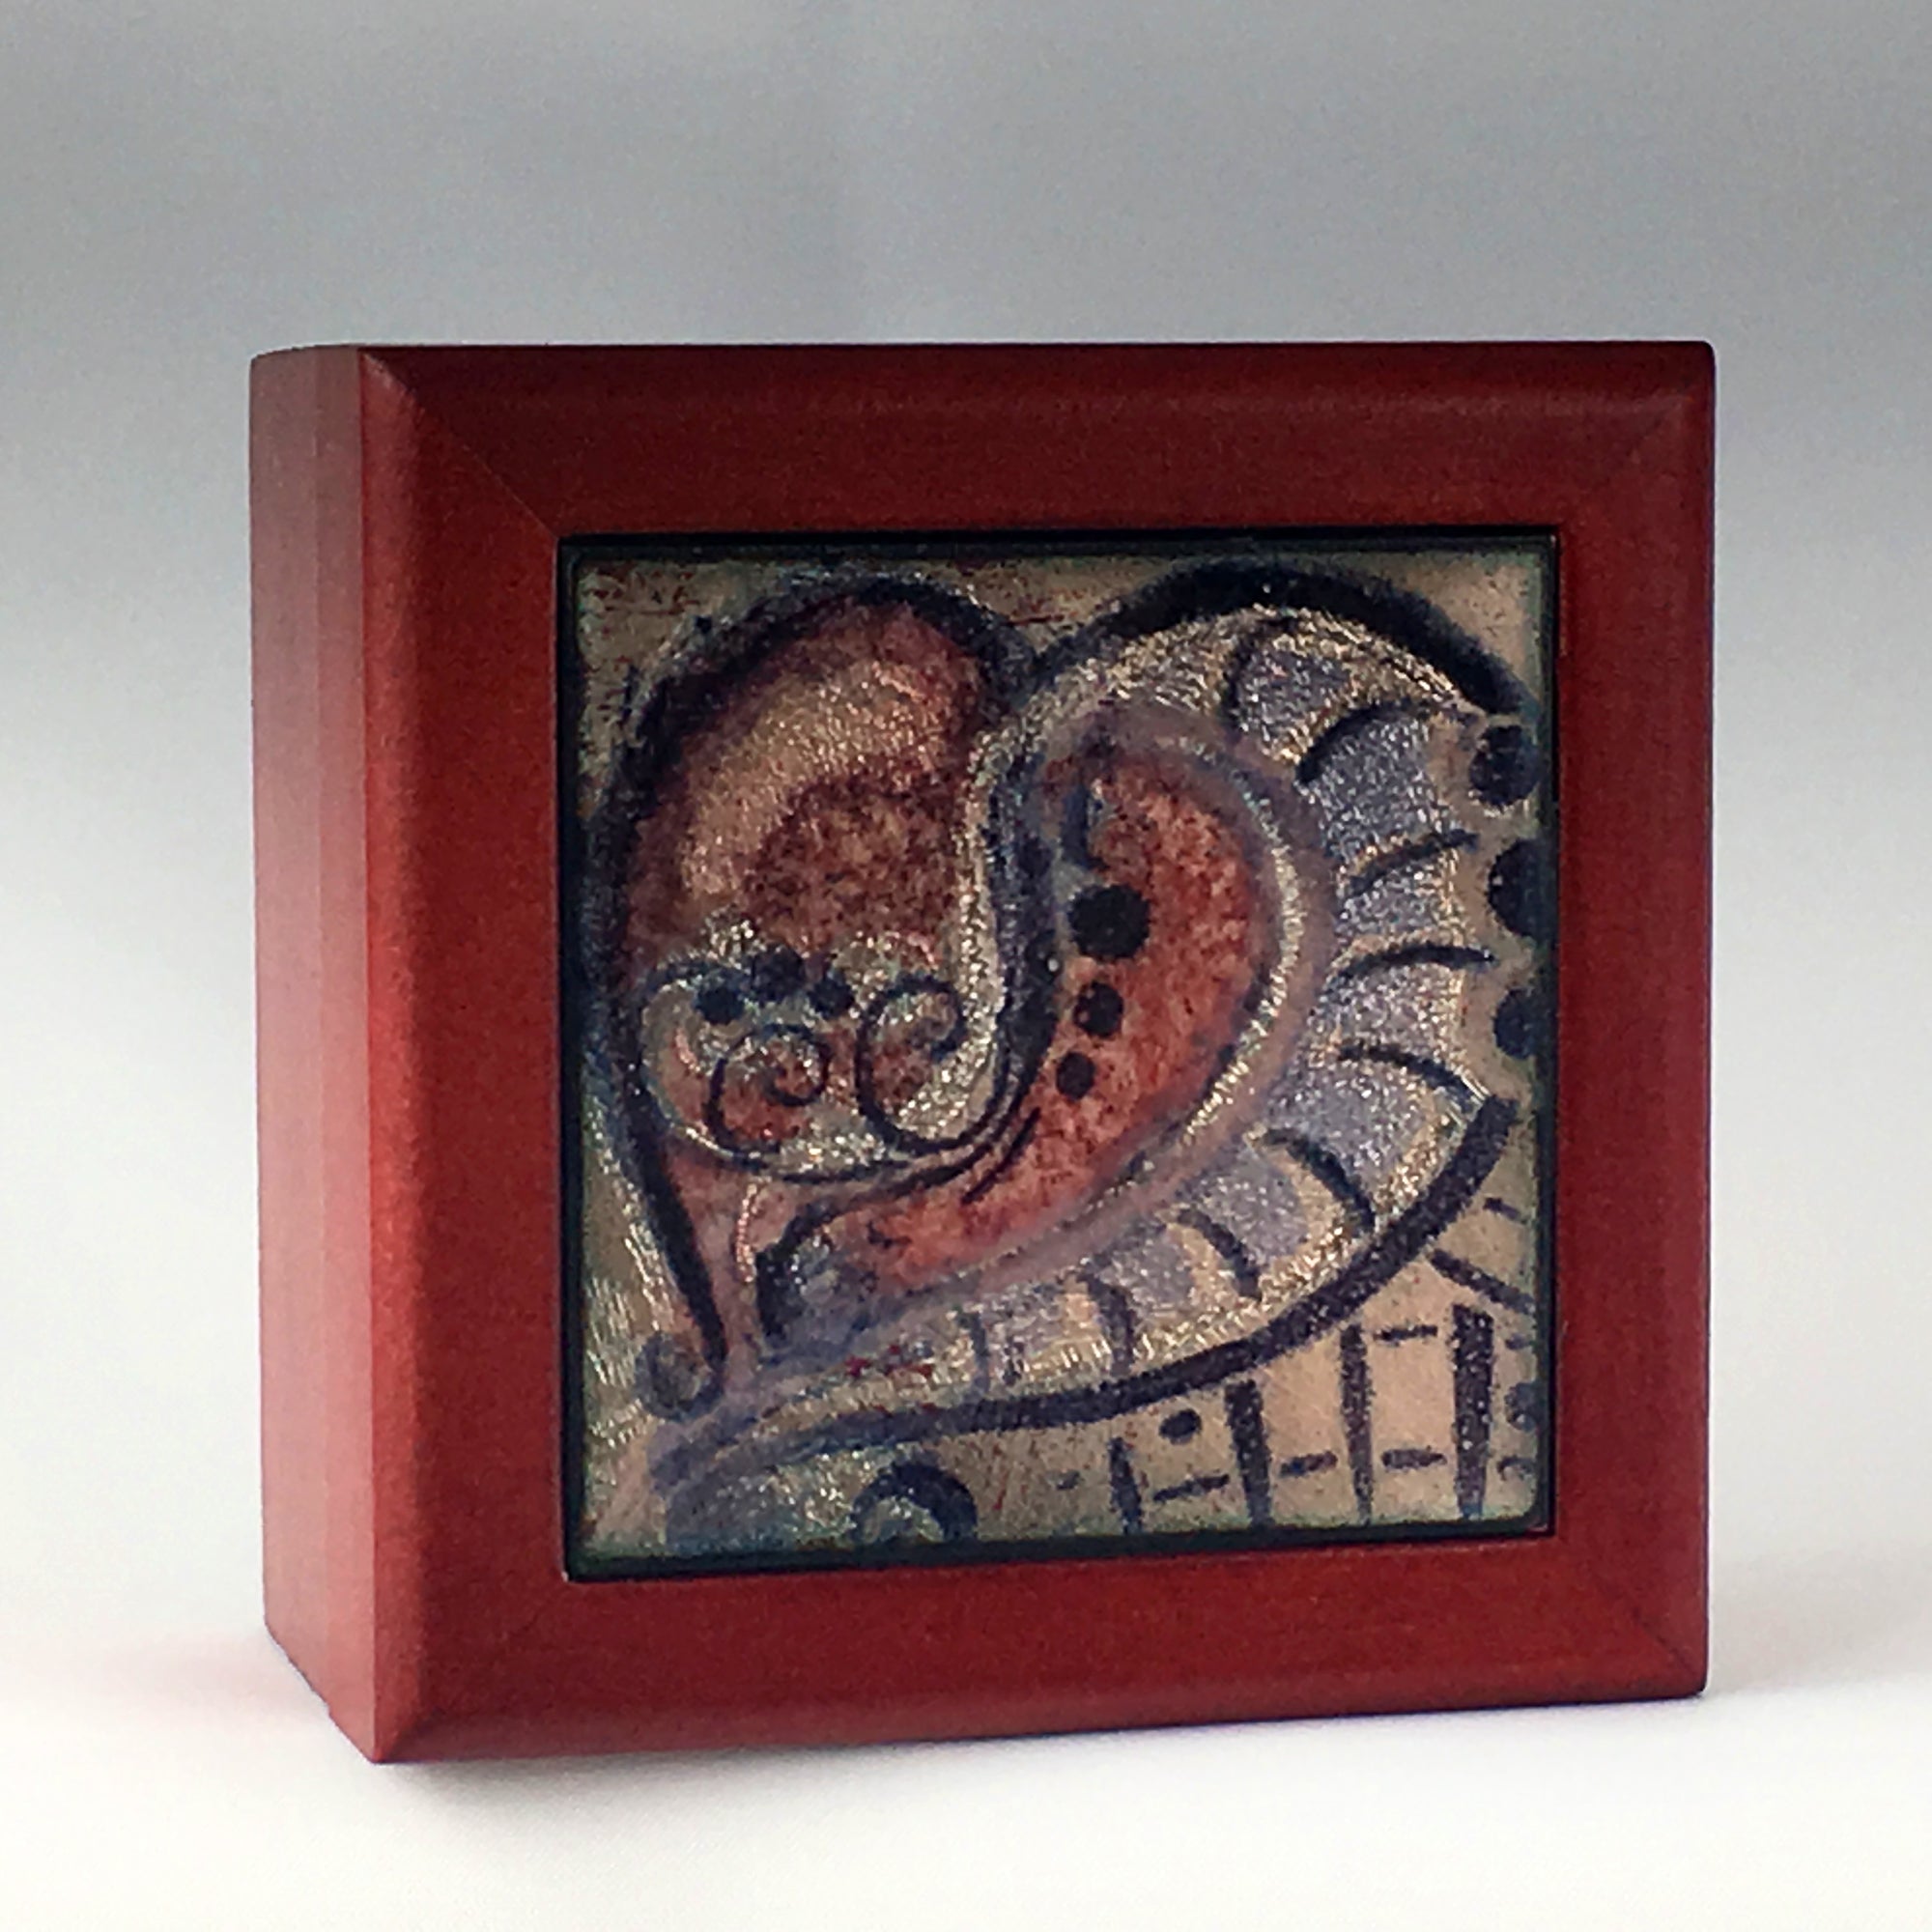 Camille Patton Abstract Heart Vitreous Enamel Inlay in lid of wooden box